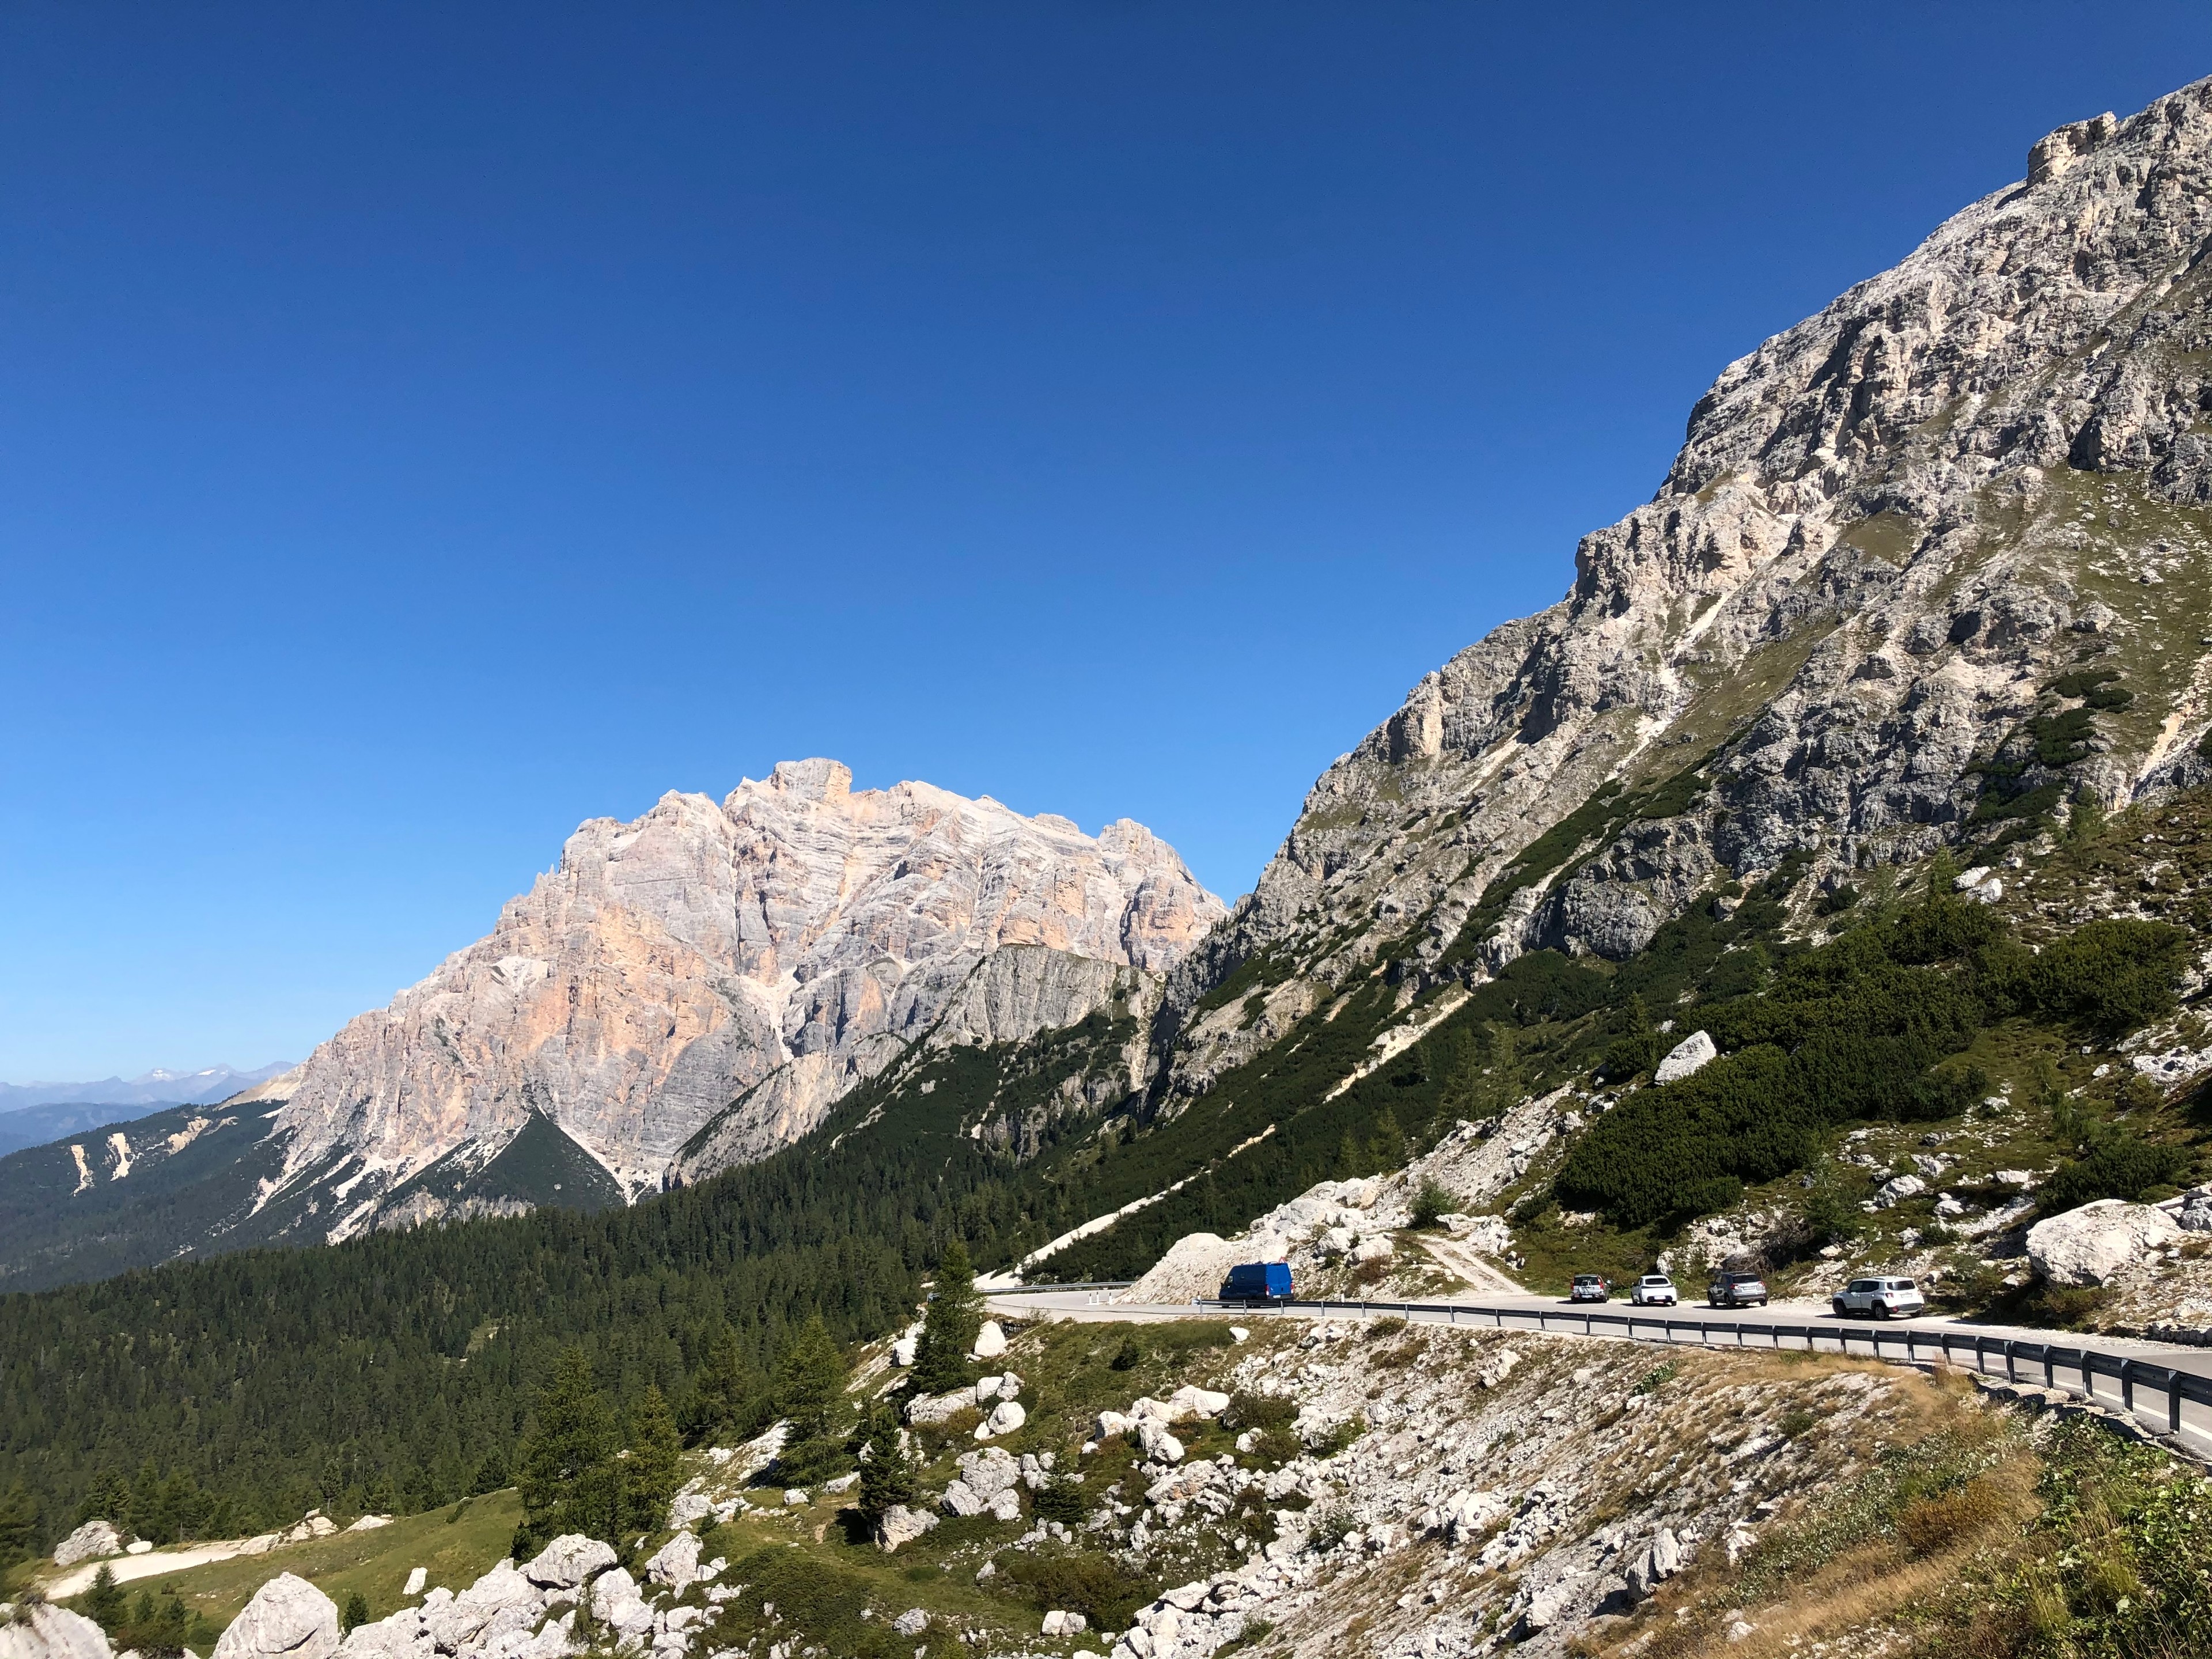 A father and son trip trough the Italian Dolomites